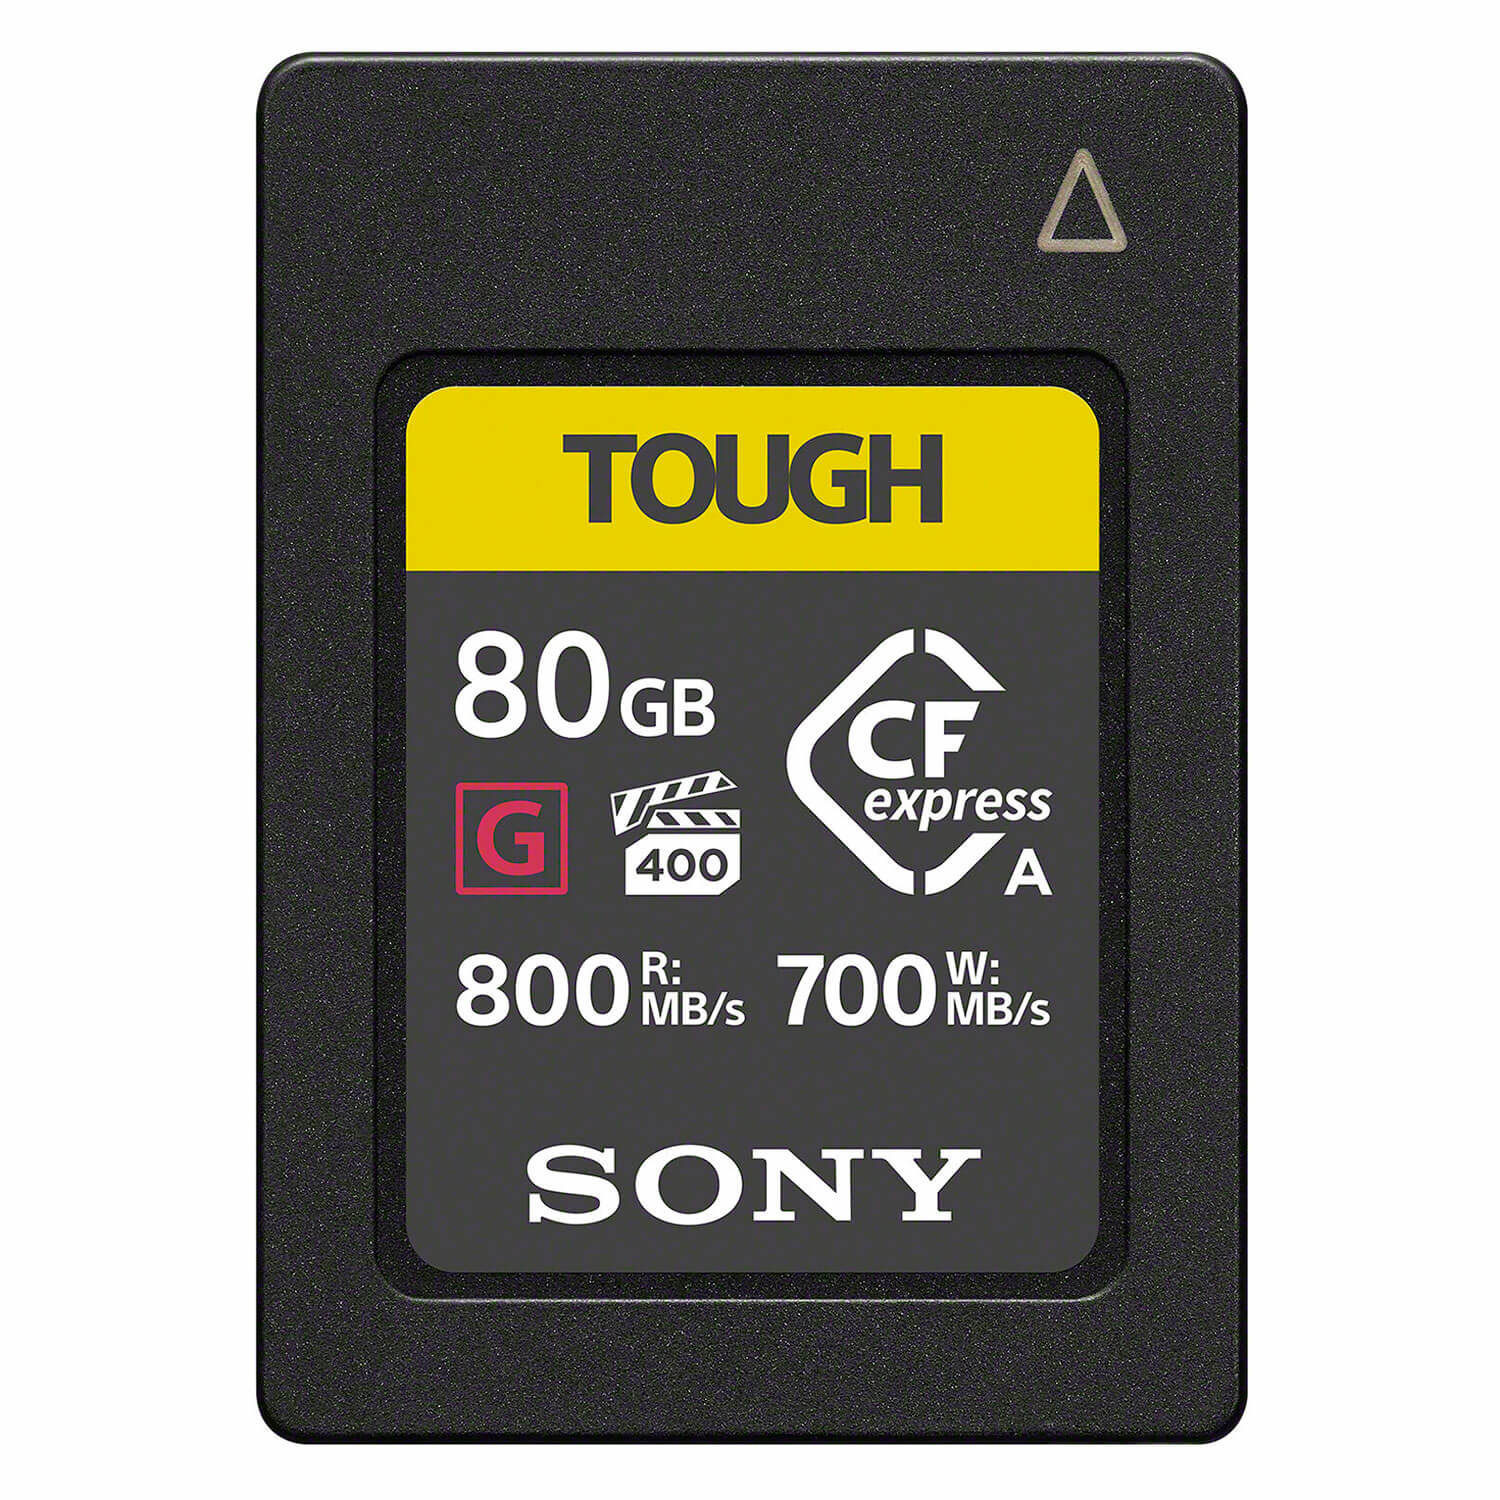 Sony 80GB Tough CFexpress Type A 800MB/s geheugenkaart